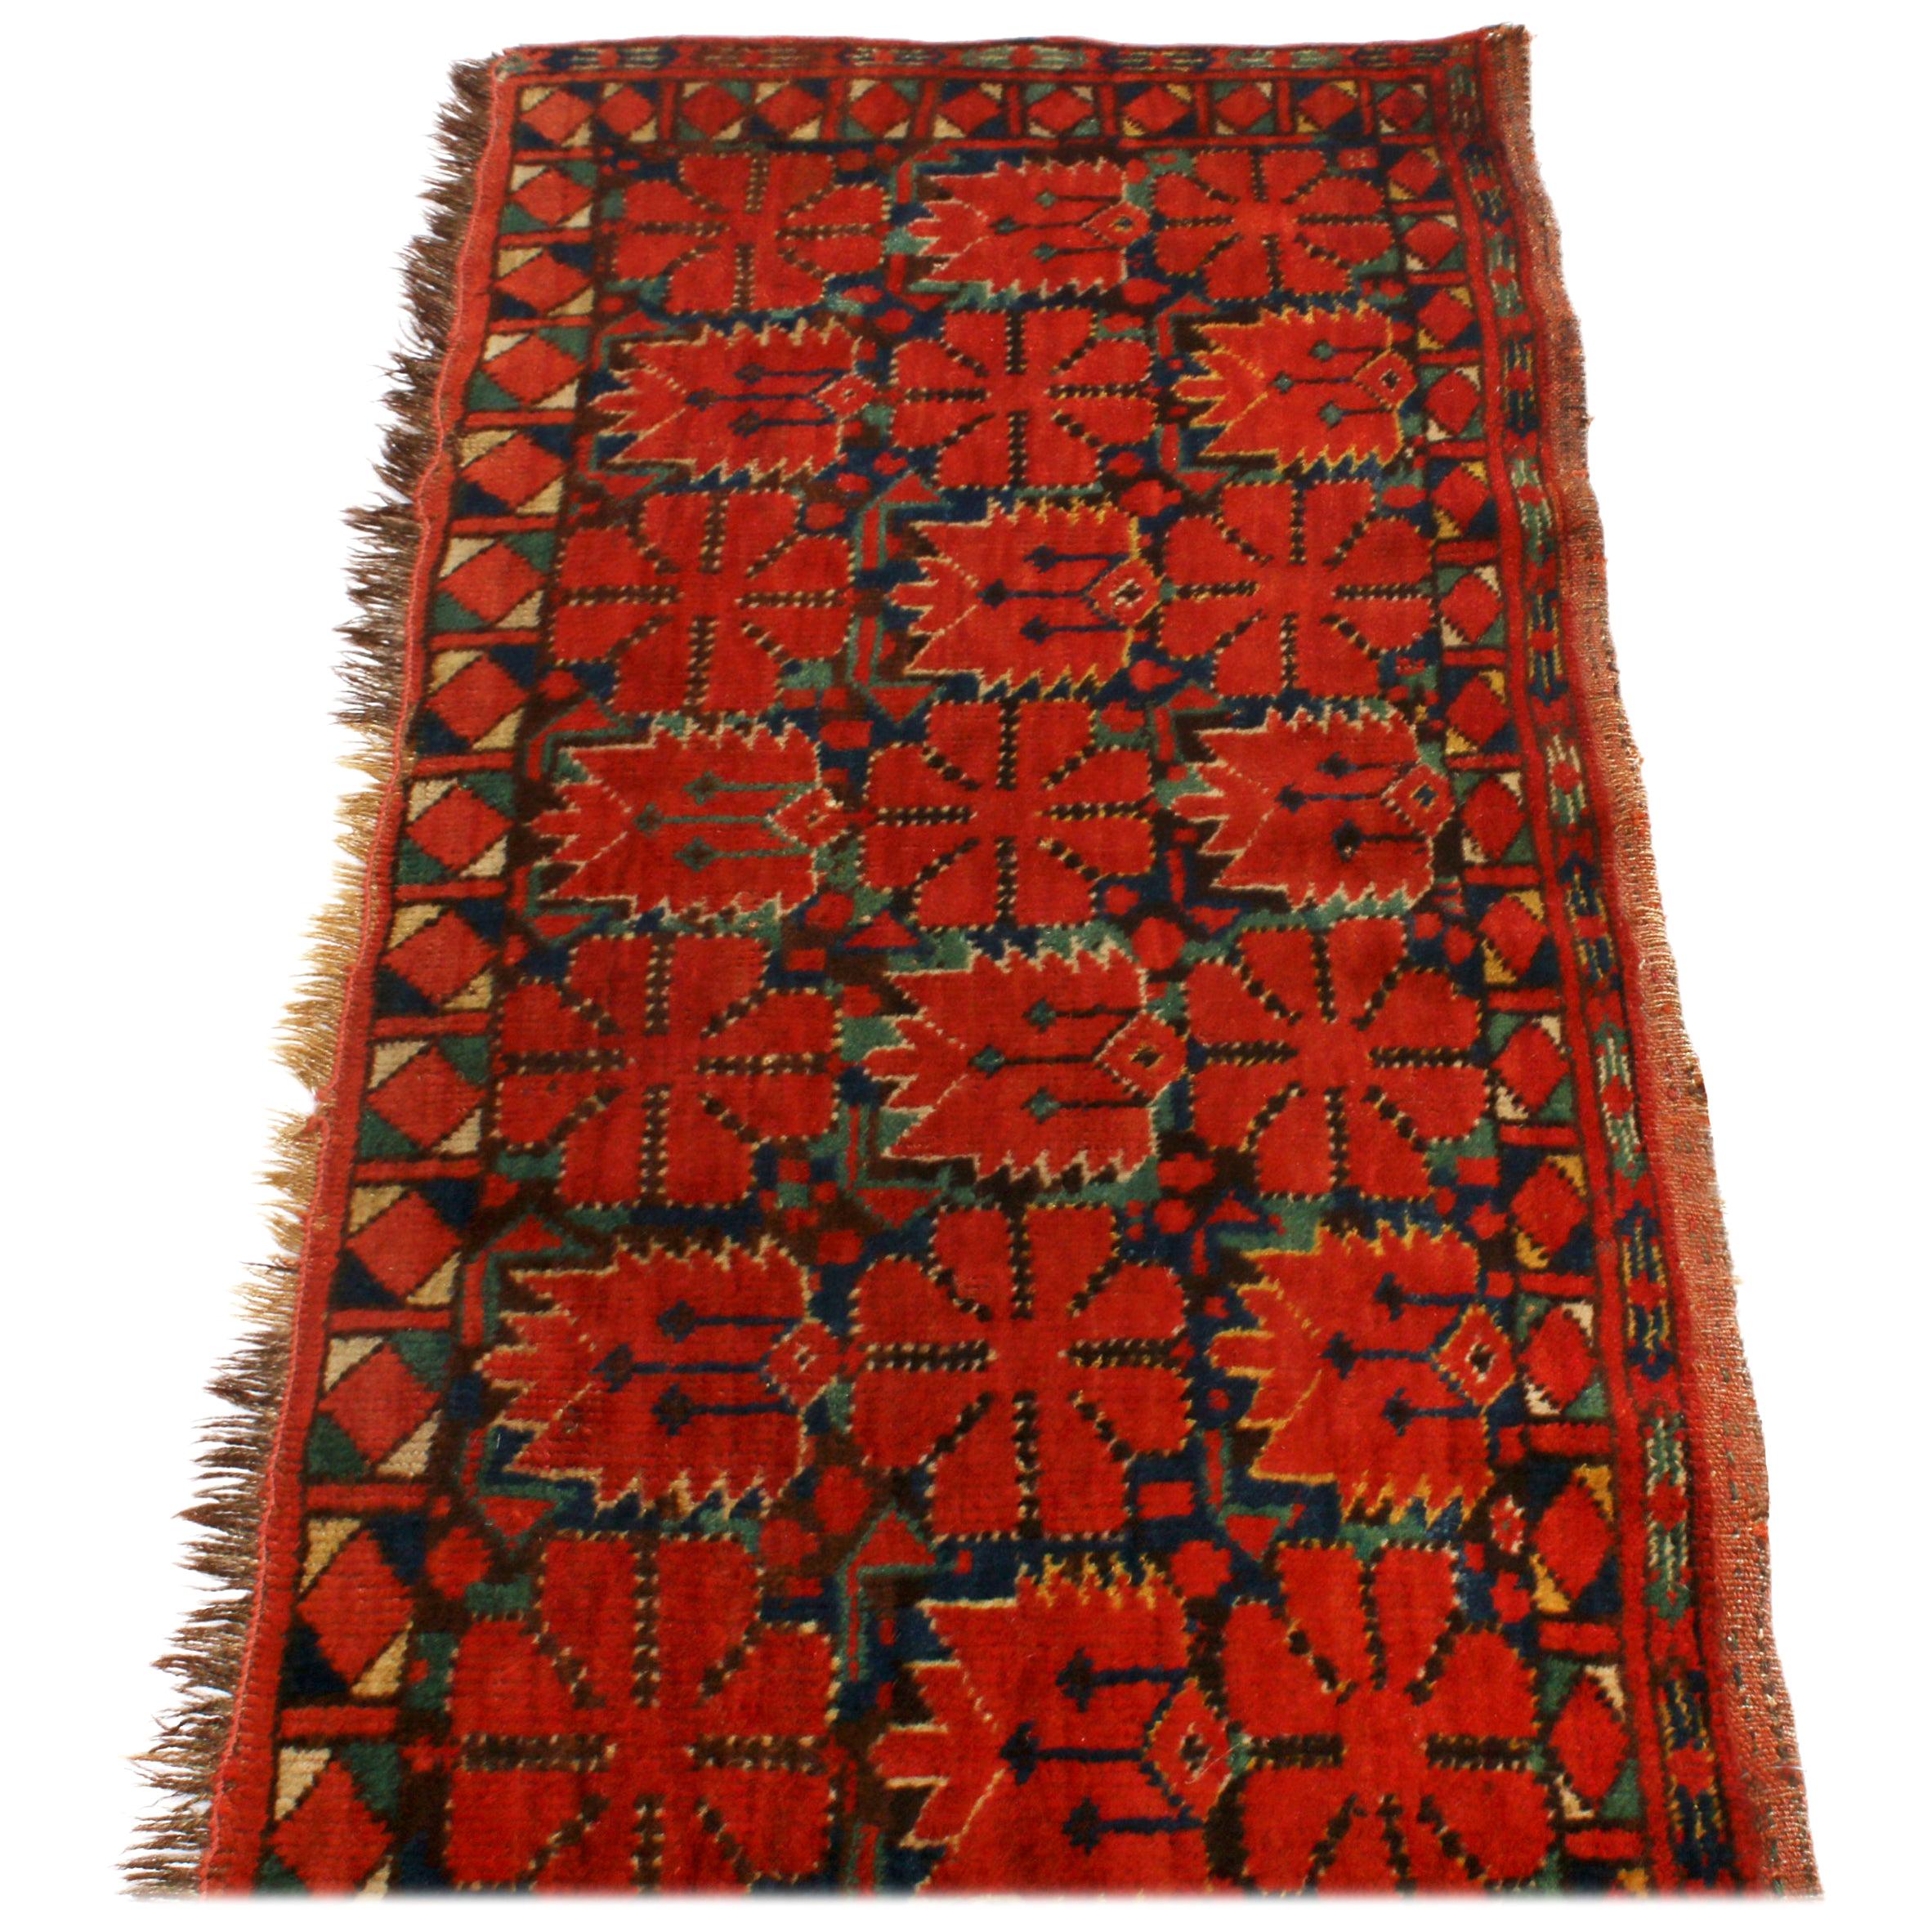 Antique Turkeman Red and Green Wool Rug Geometric Pattern